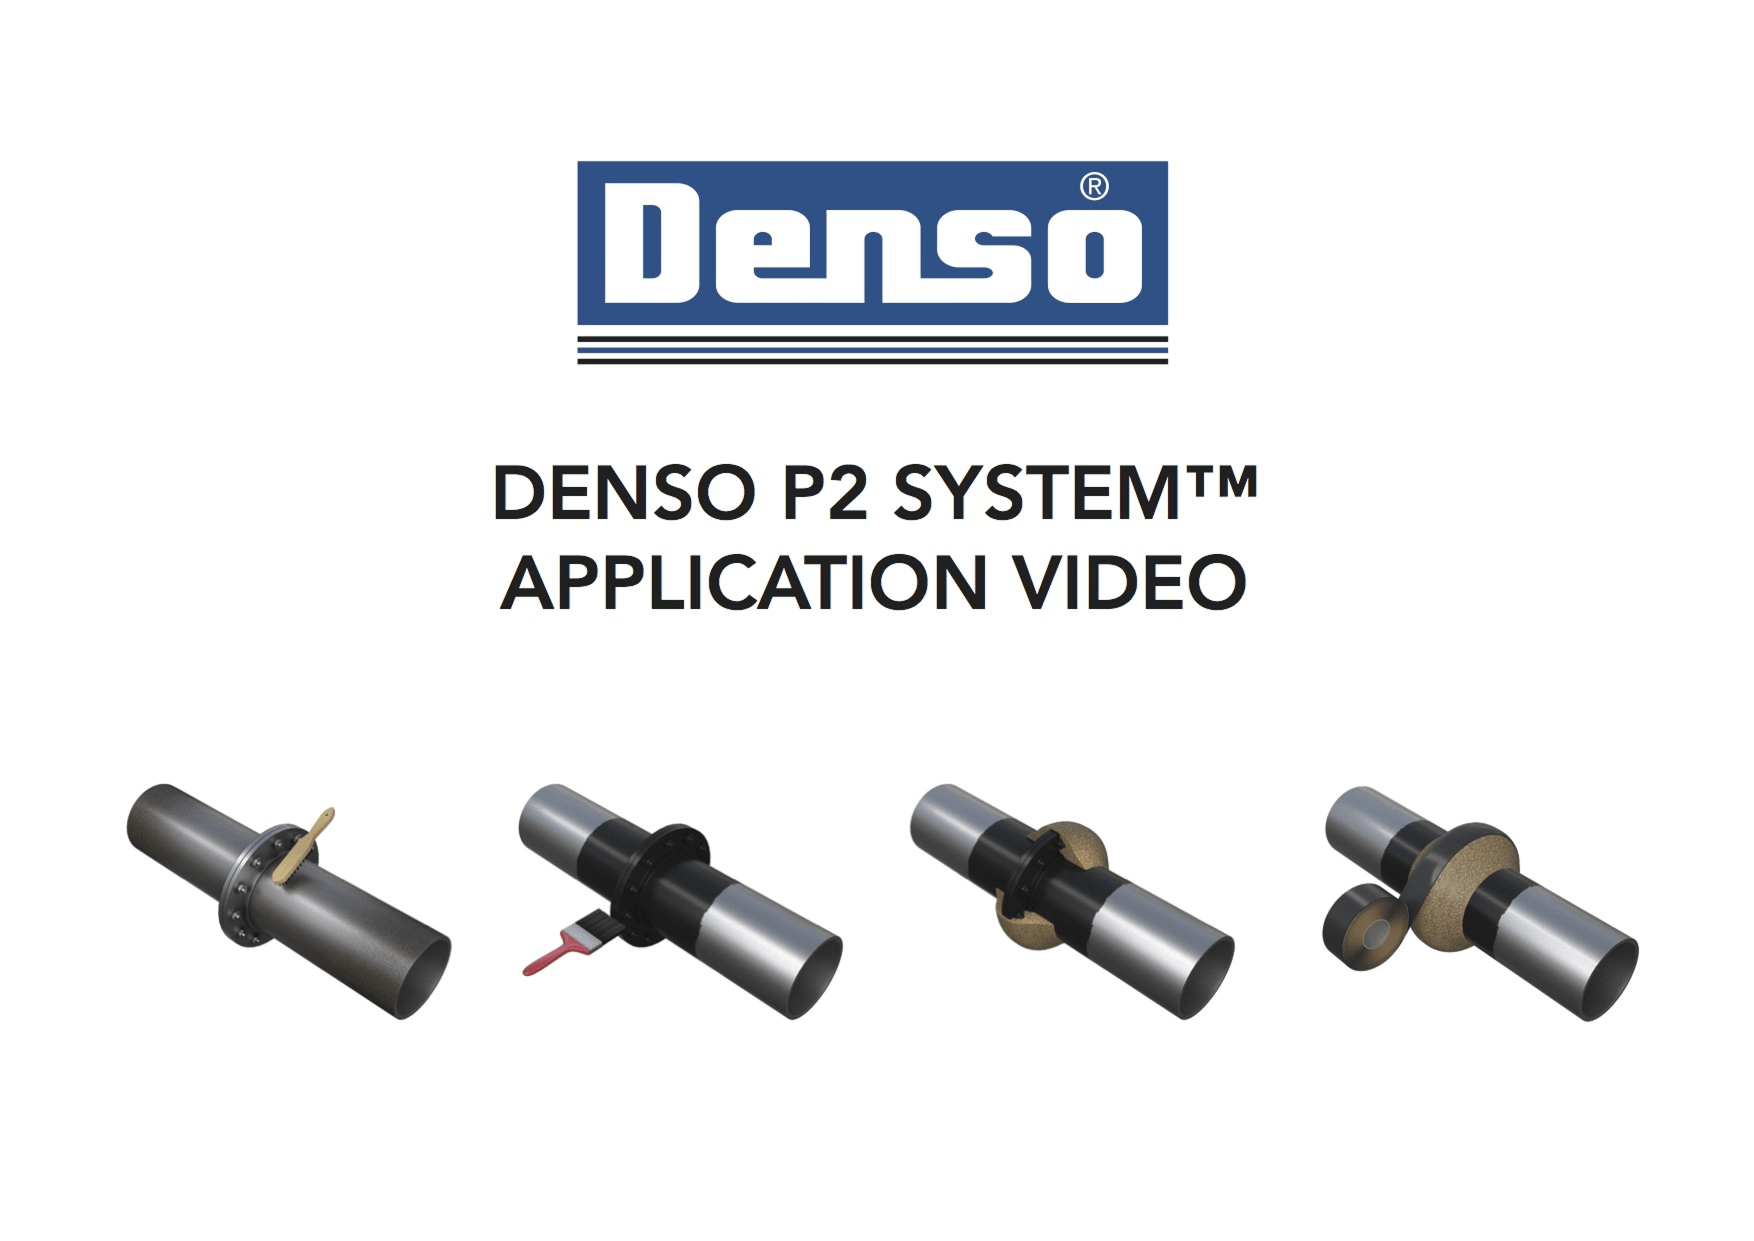 Application of Denso P2 System™